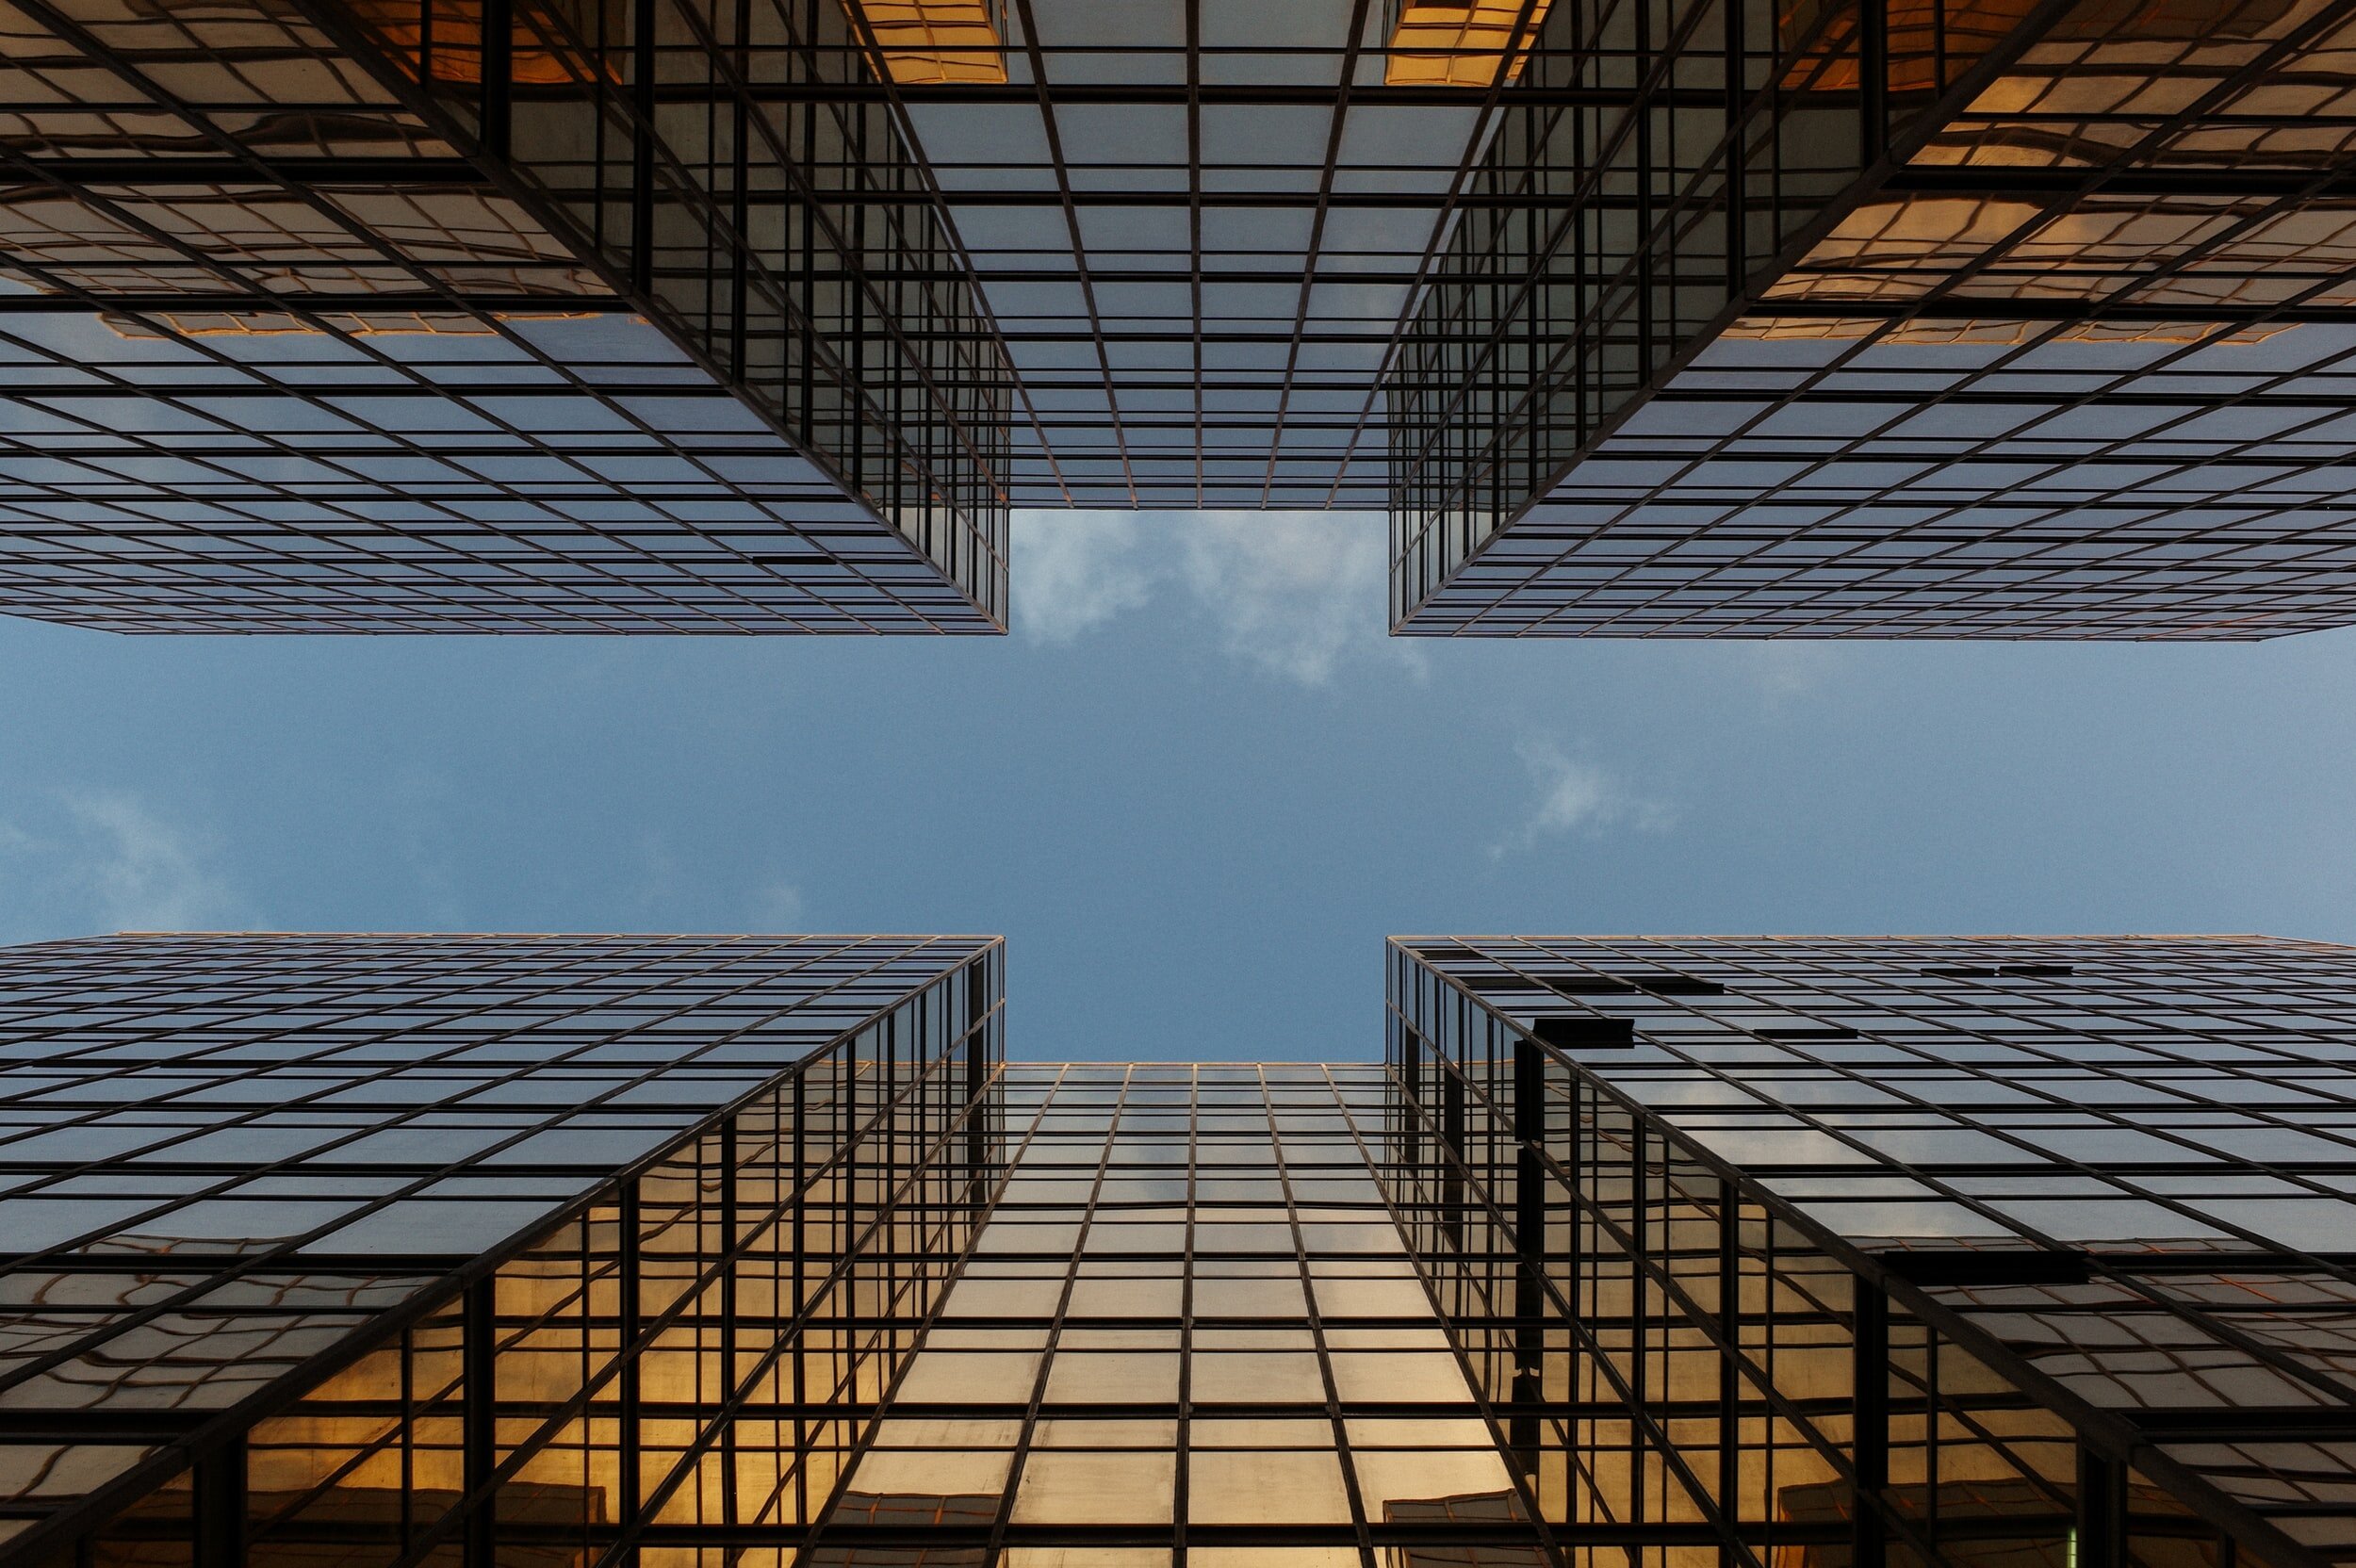 The camera looks directly upward at the sky between two towering glass office buildings